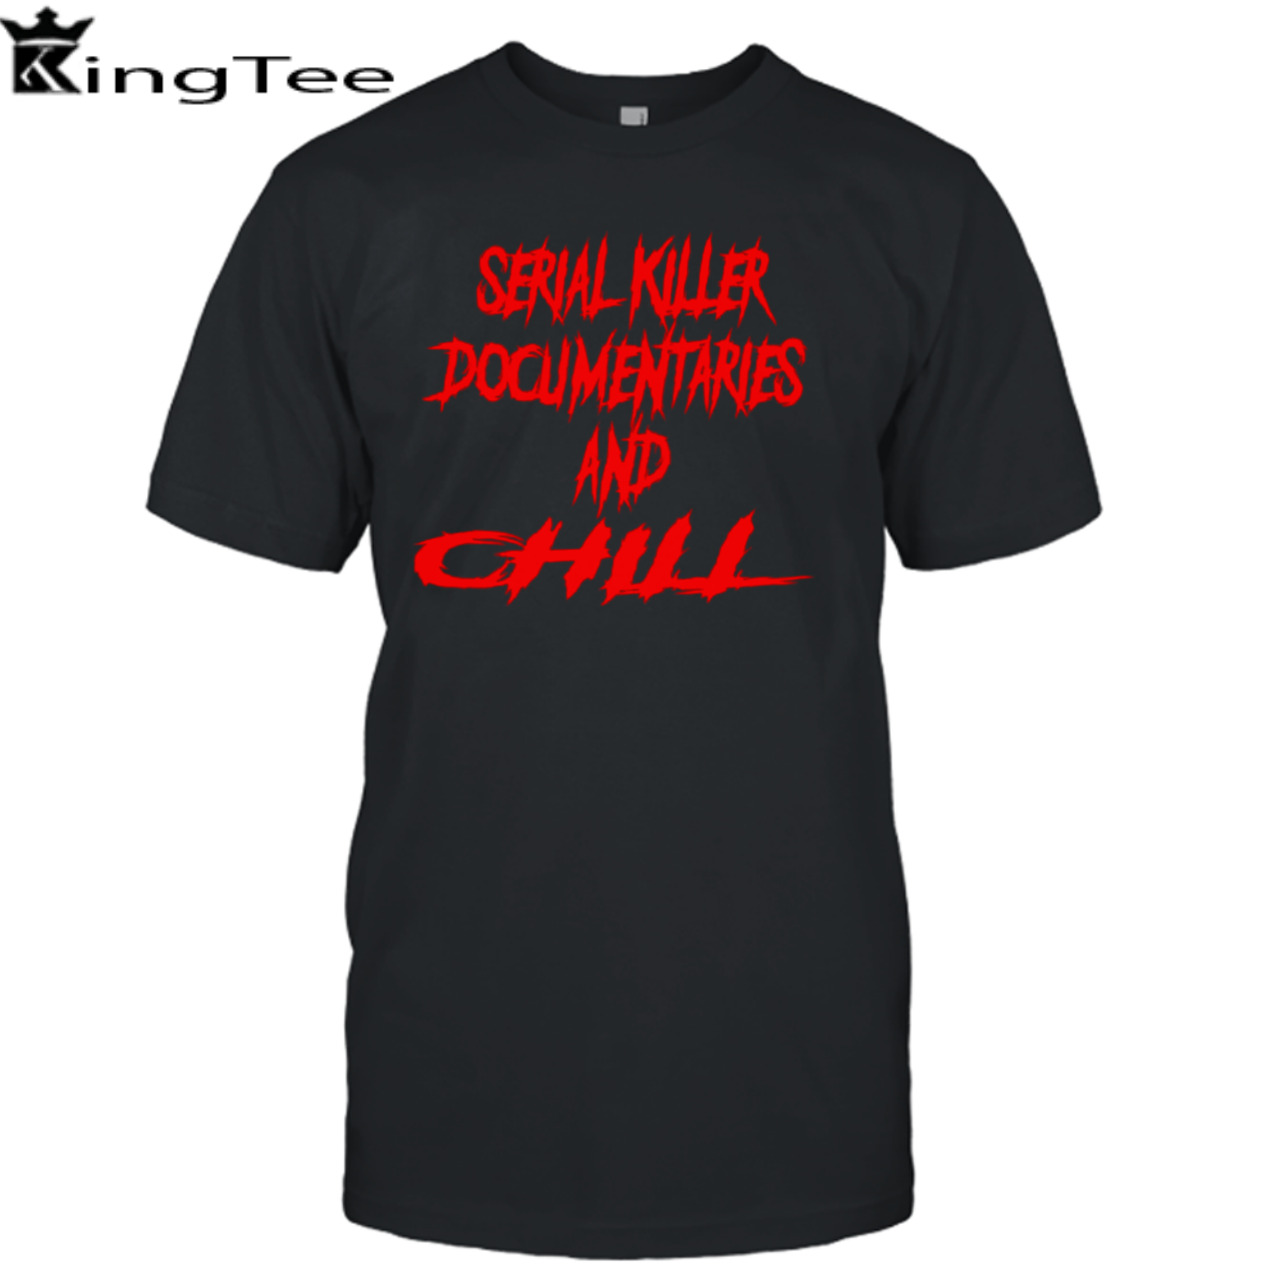 Serial Killer Documentaries And Chill shirt